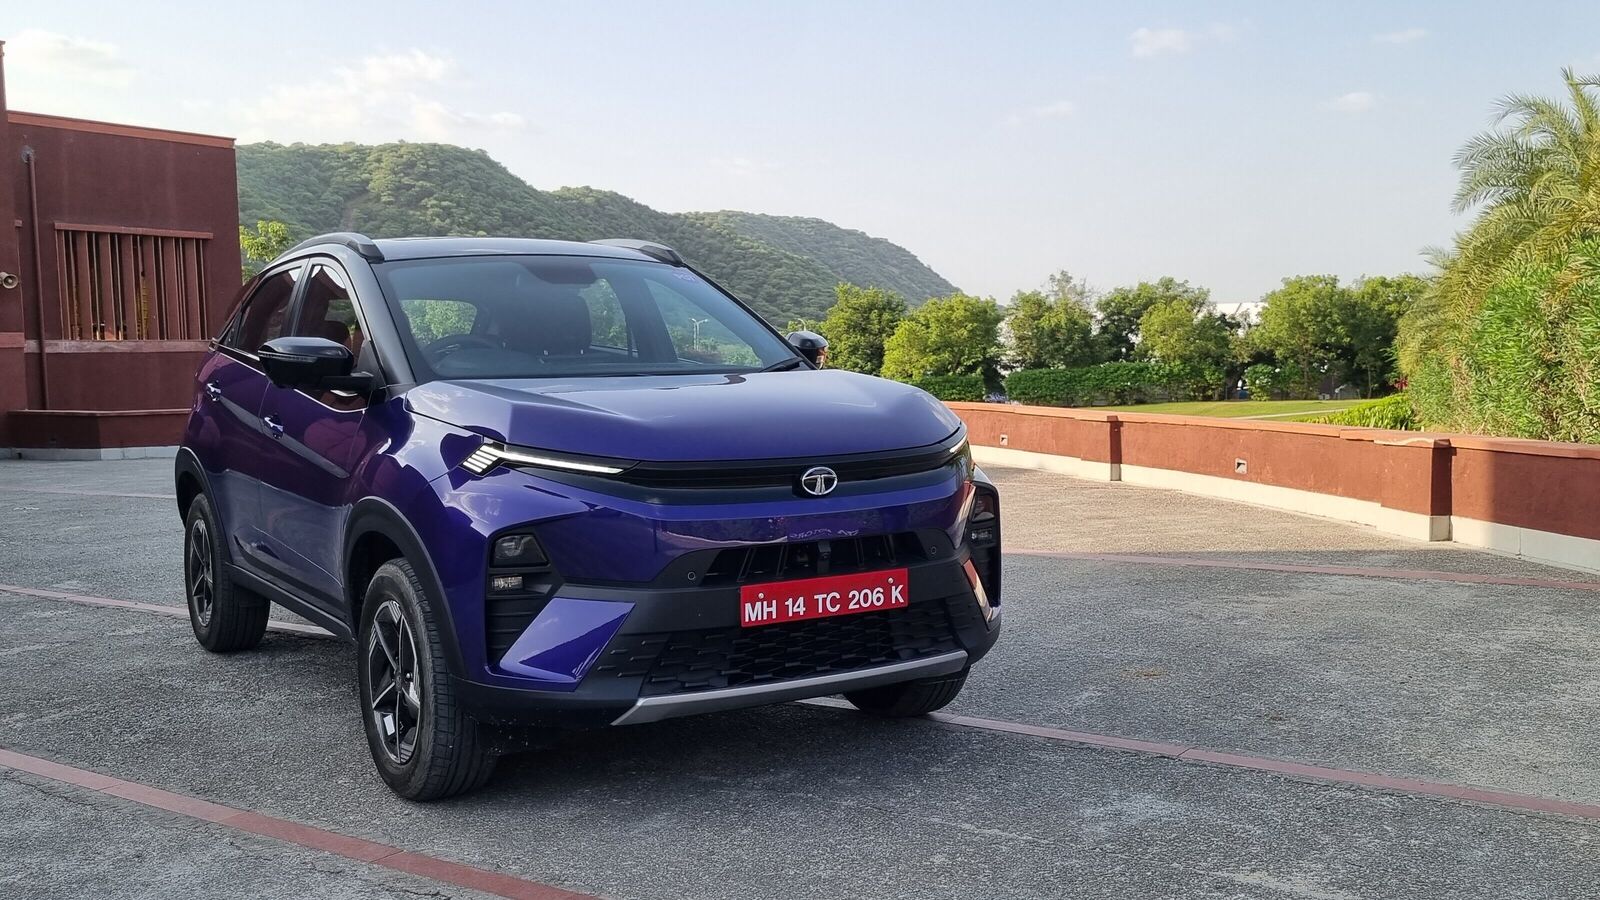 Tata Nexon gets benefits of up to ₹1 lakh. Check details MediaInsights.in